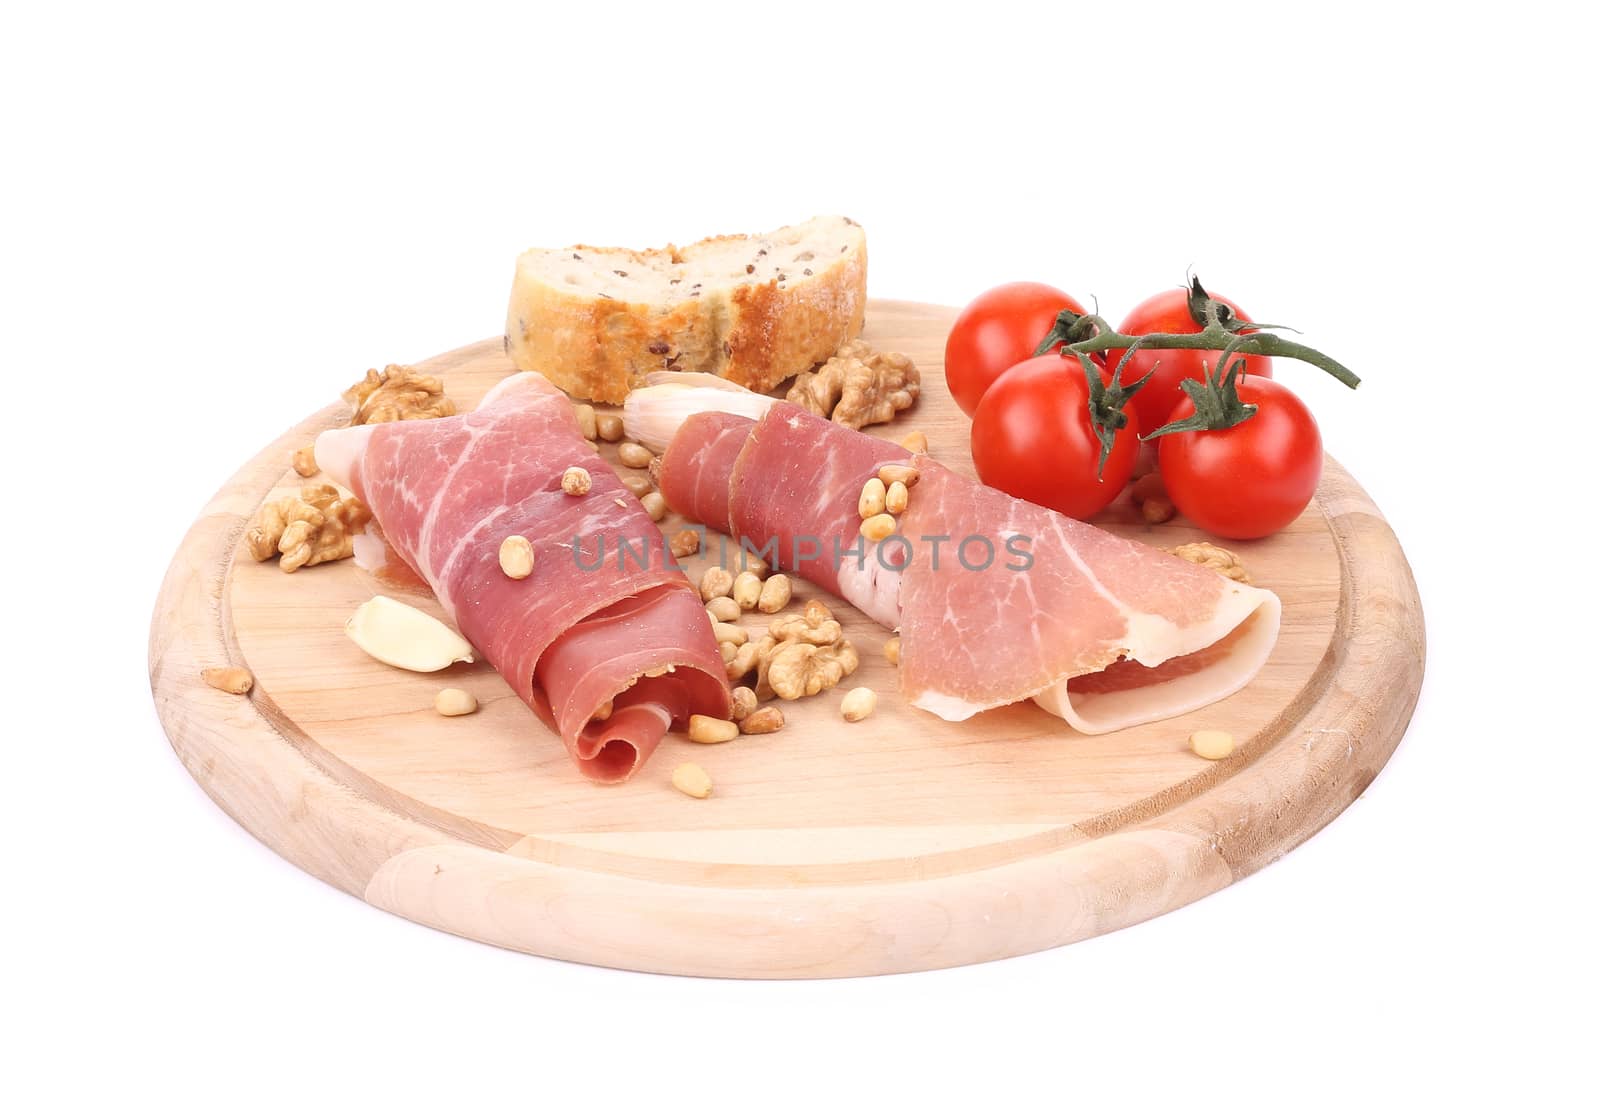 Composition of prosciutto on wooden platter. Isolated on a white background.